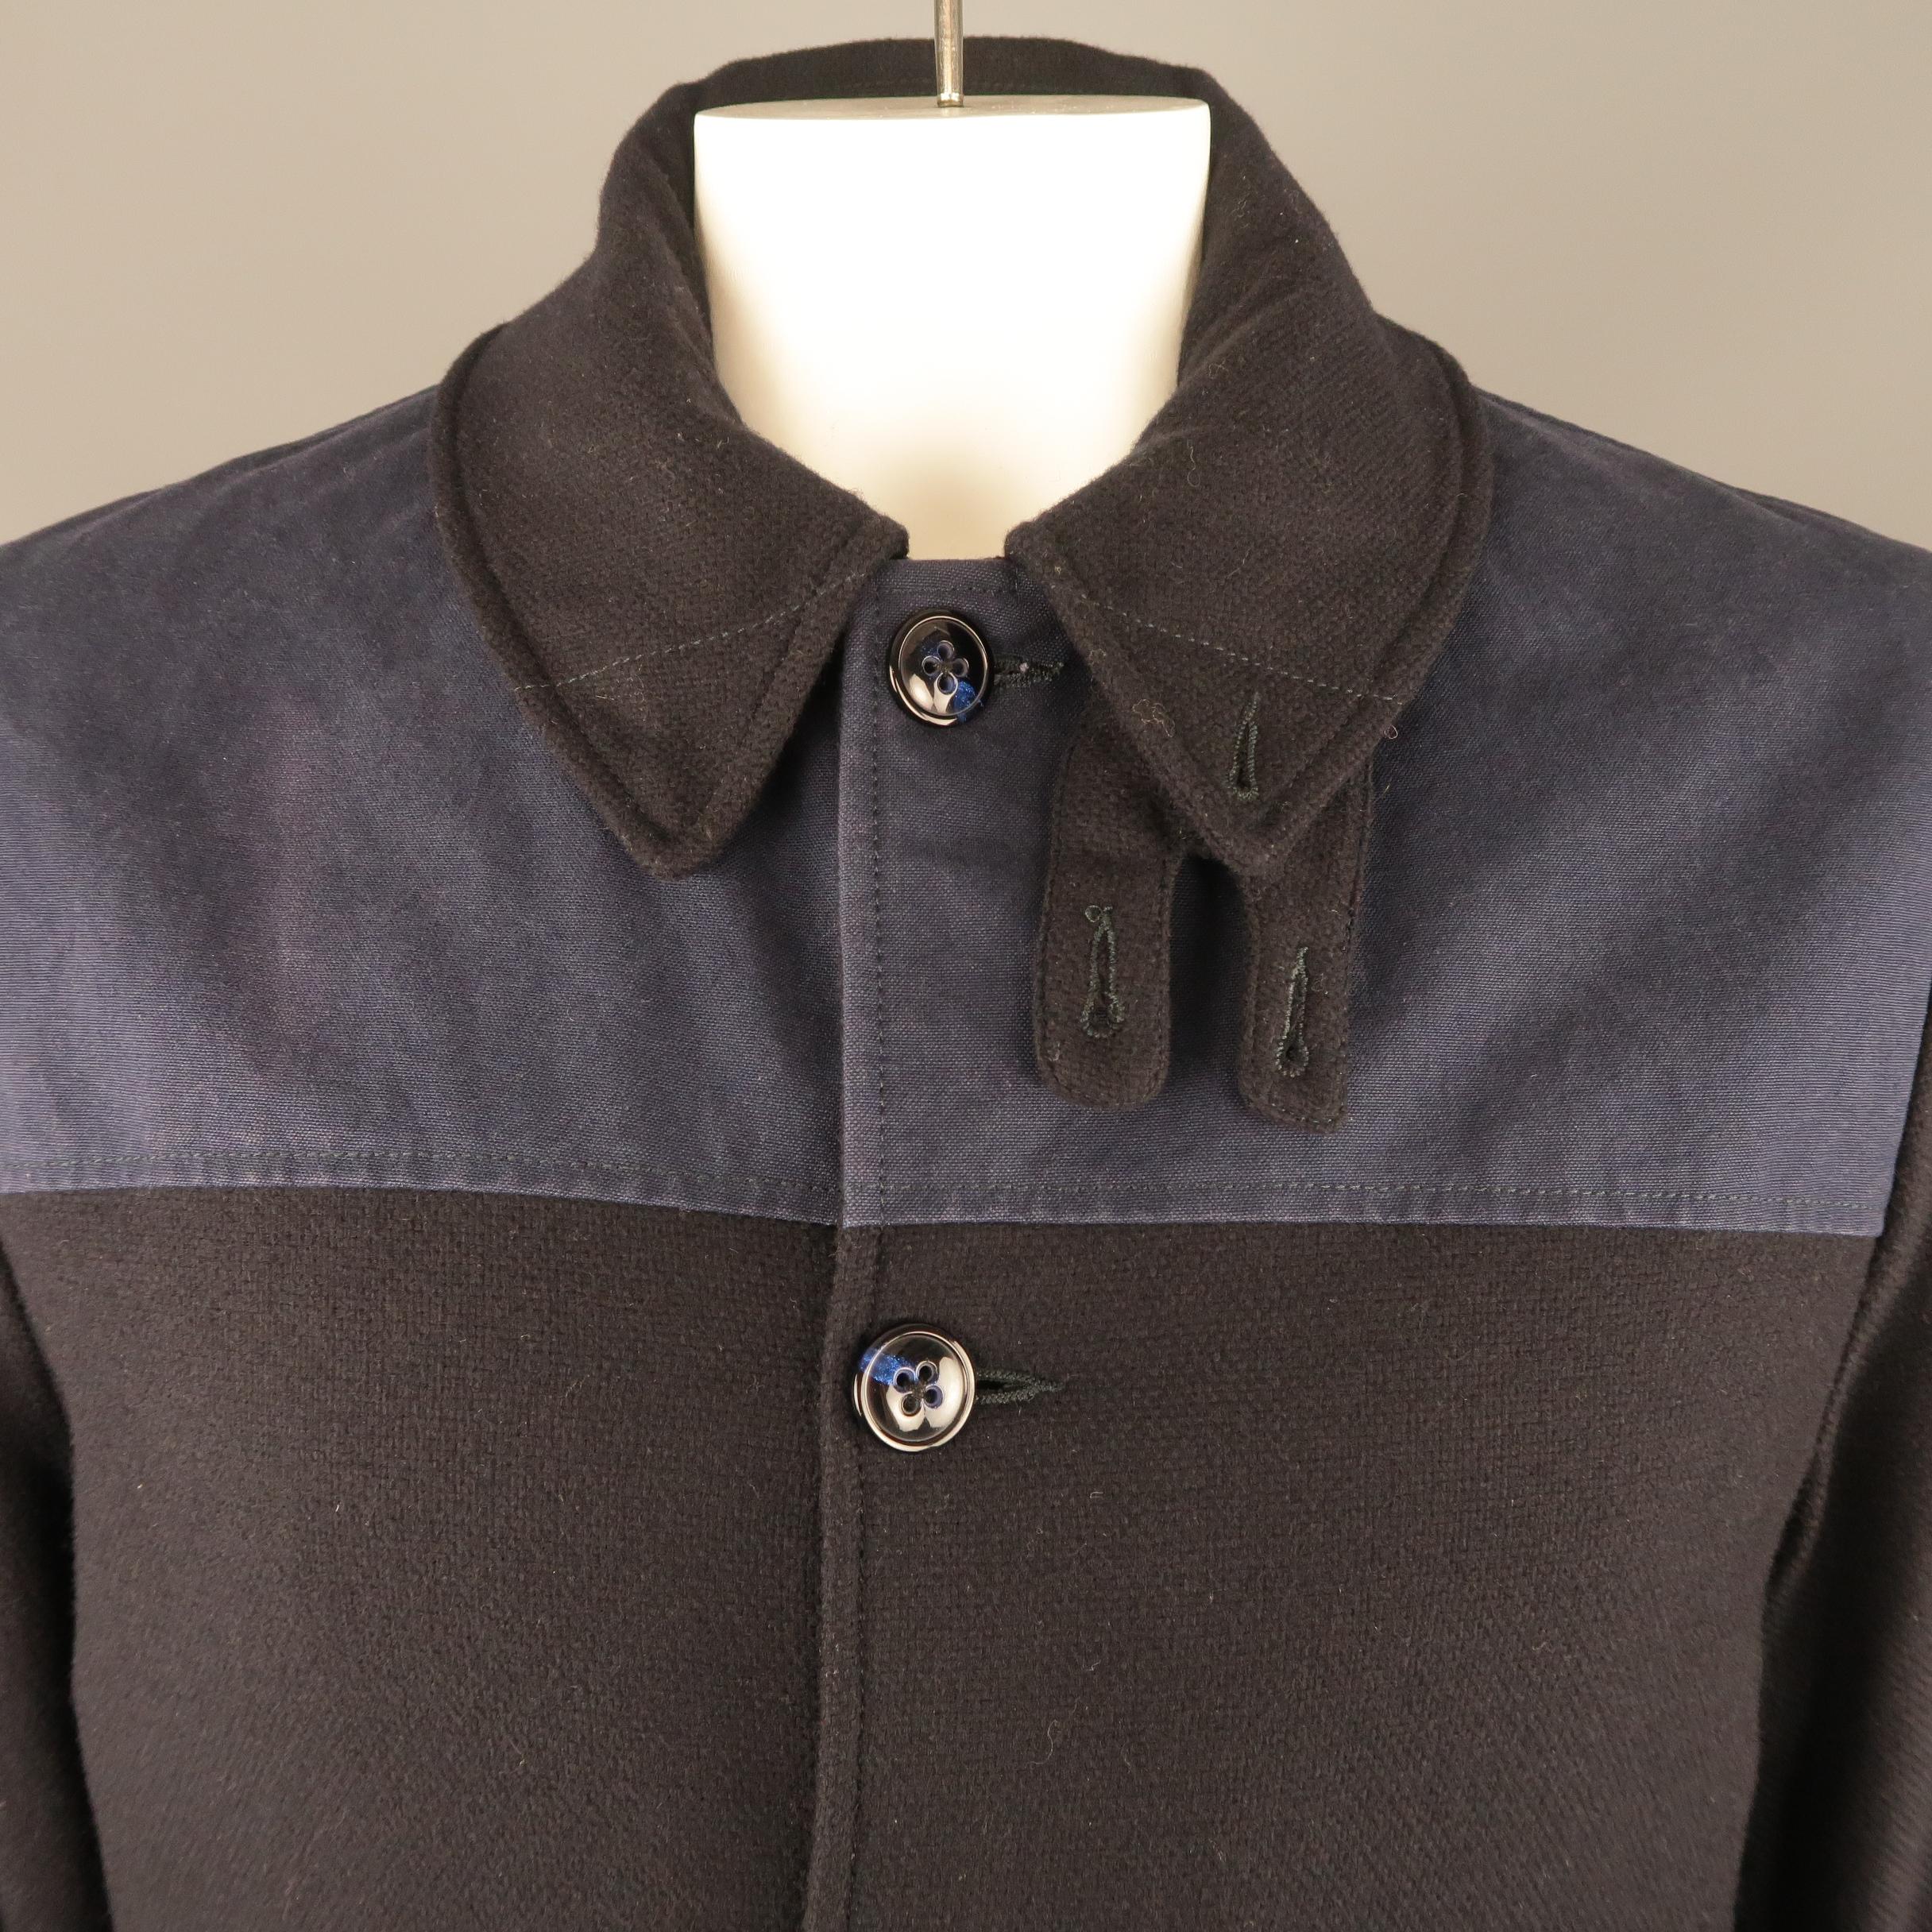 ADAM KIMMEL coat comes in a navy wool knit with blue canvas chest panel, flap pockets, and quilted liner. Minor wear. As-is. Made in Italy.
 
Good Pre-Owned Condition.
Marked: L
 
Measurements:
 
Shoulder: 18 in.
Chest: 46 in.
Sleeve: 27 in.
Length: